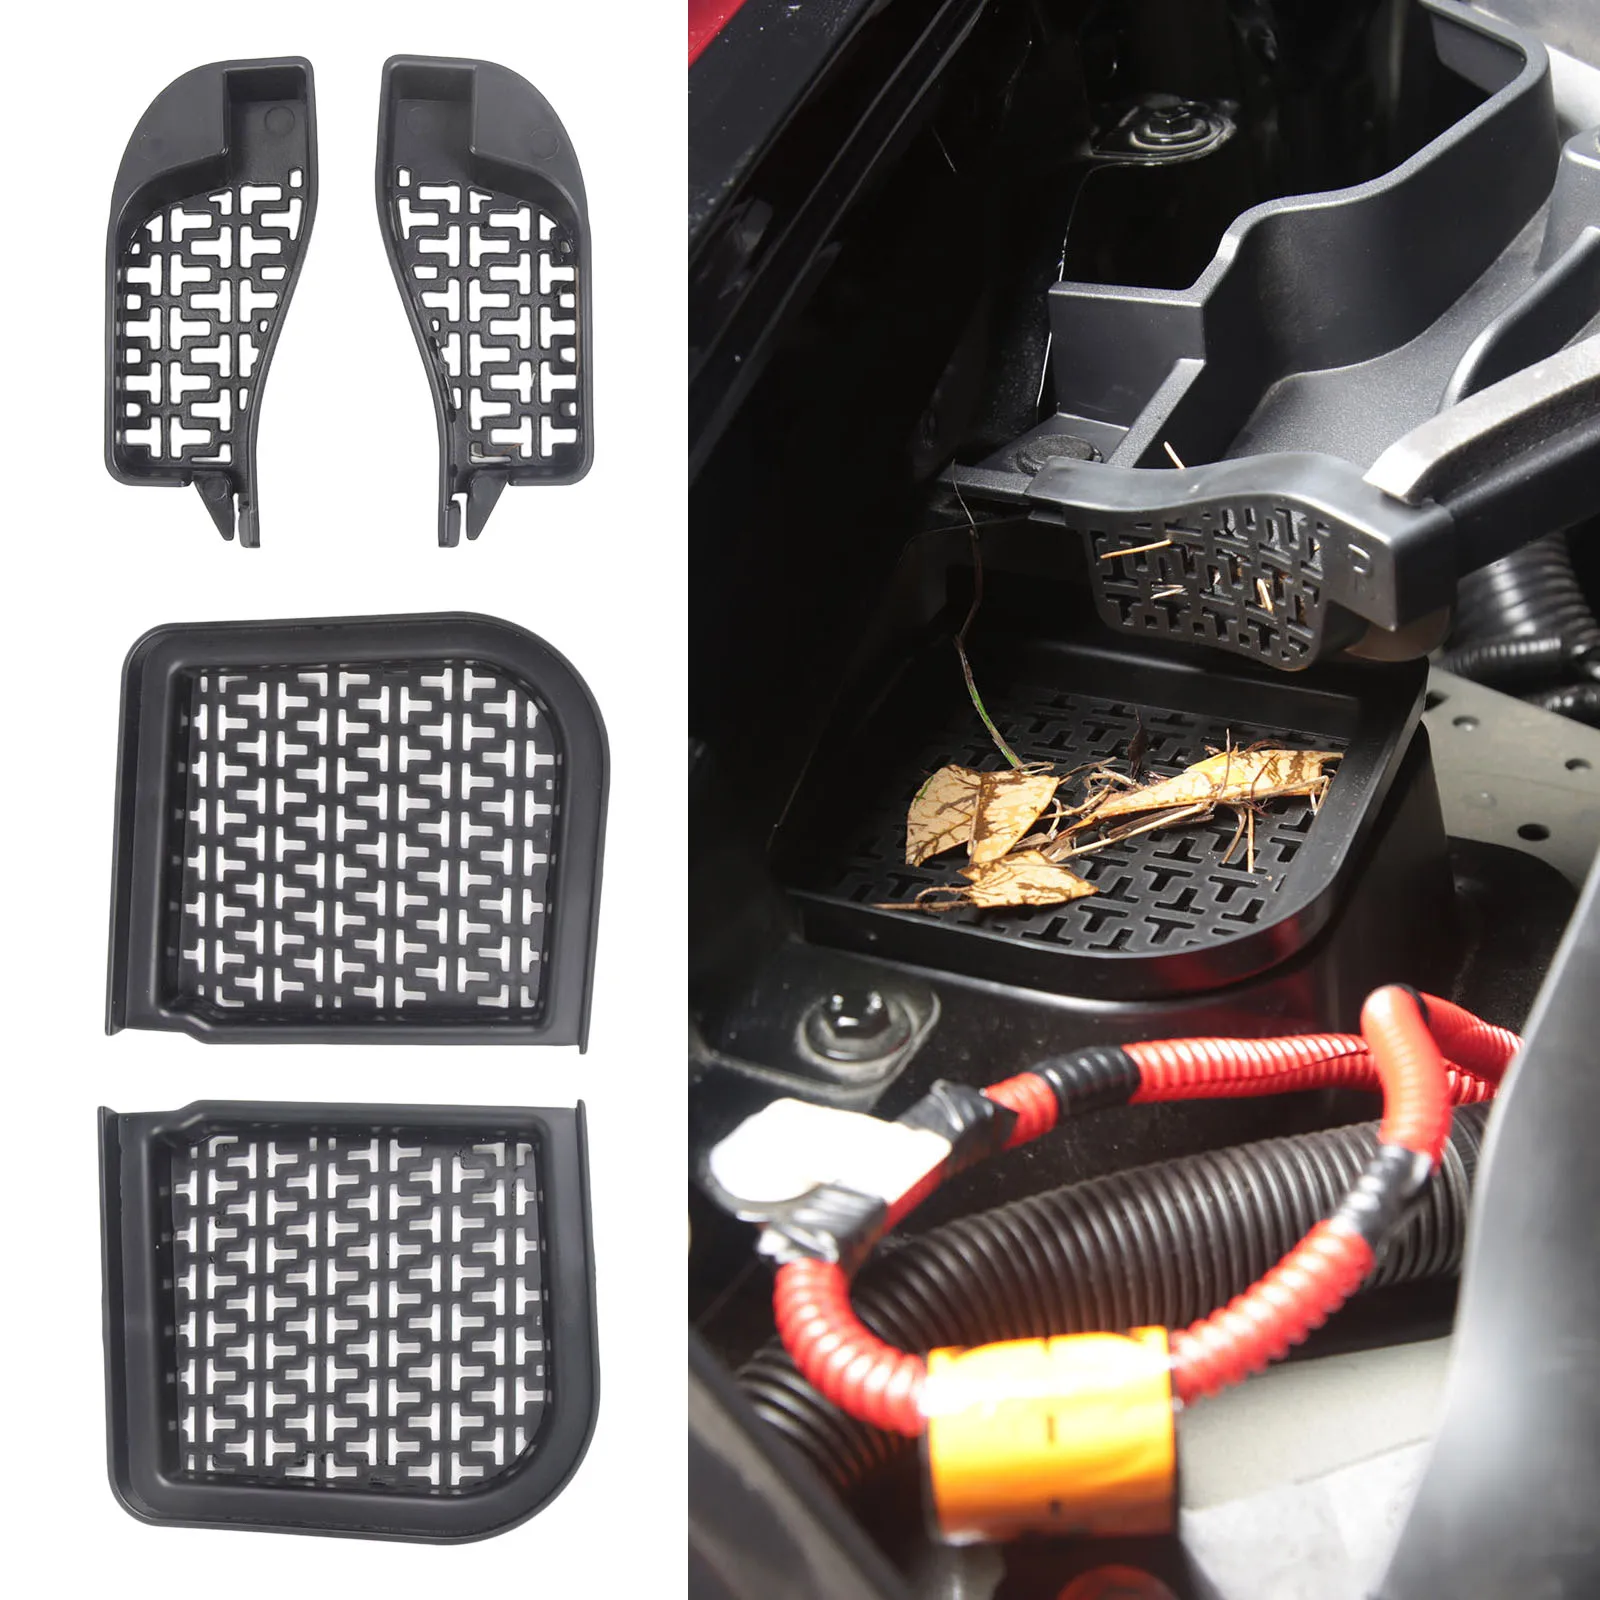 Filter Element Screen Filter Protector Protection Cover Filter Screen for Tesla Model Y ABS Plastic Prevent clogging